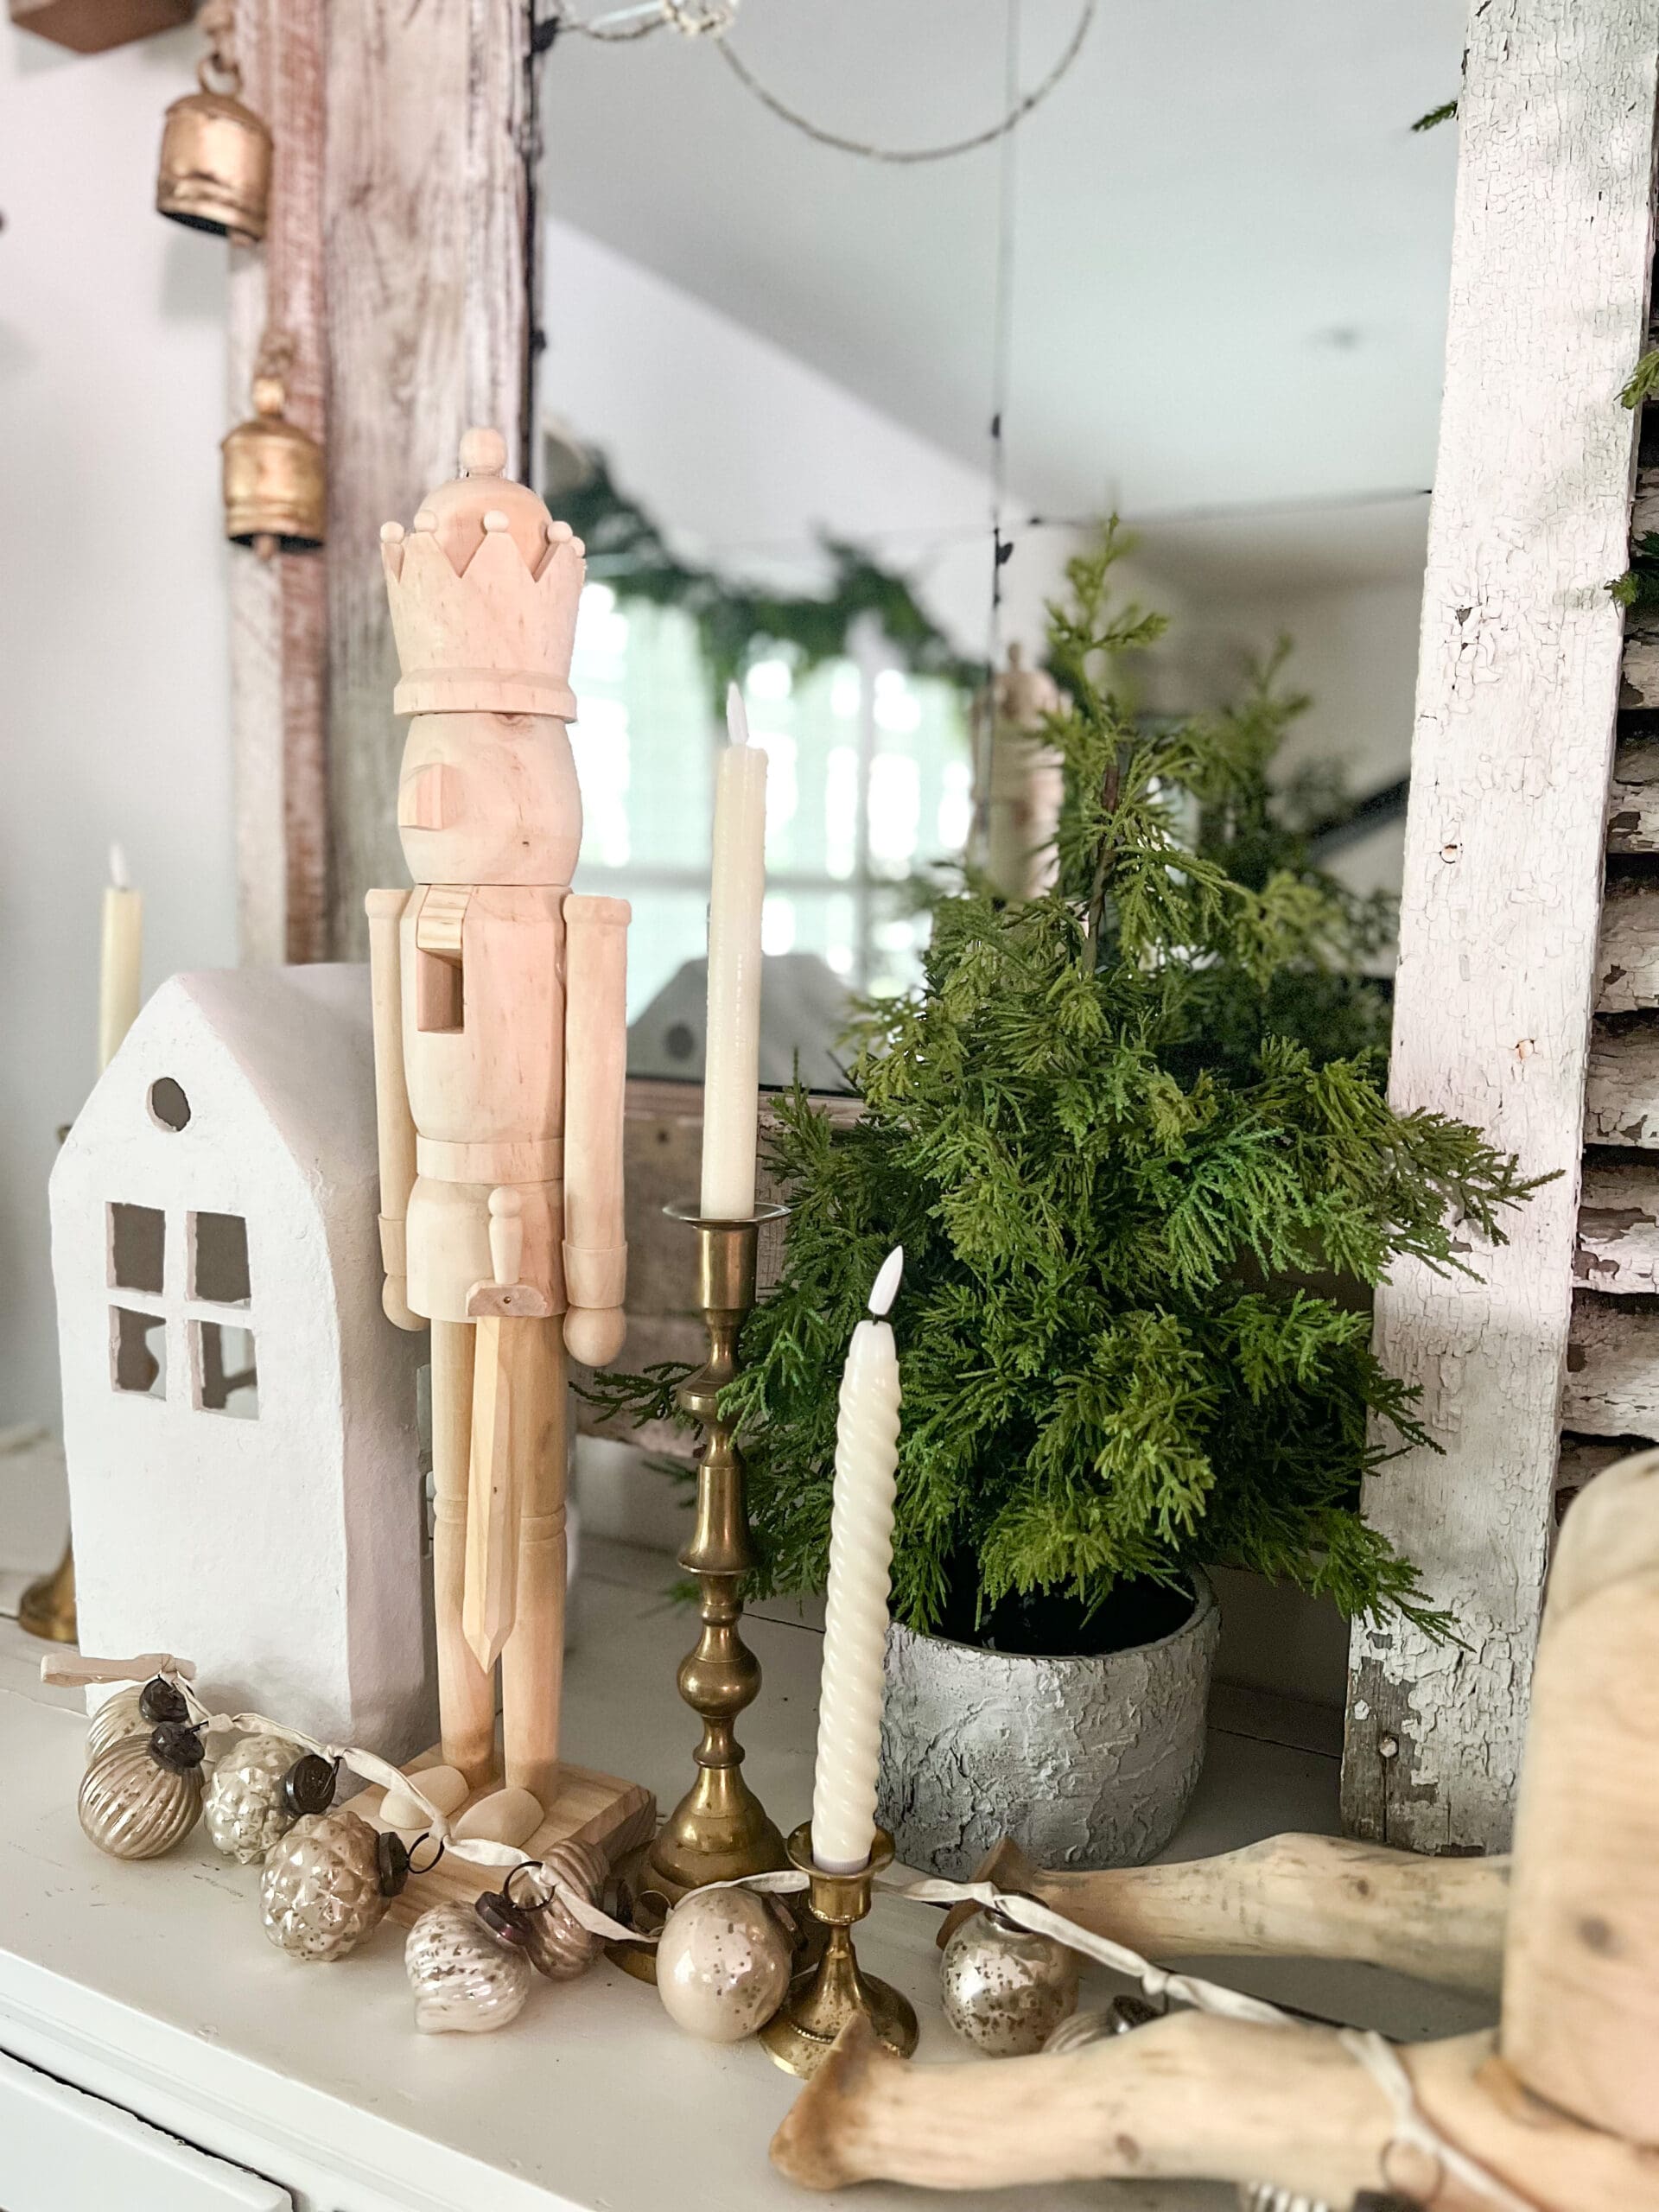 wooden nutcracker placed next to a small white paper mache house